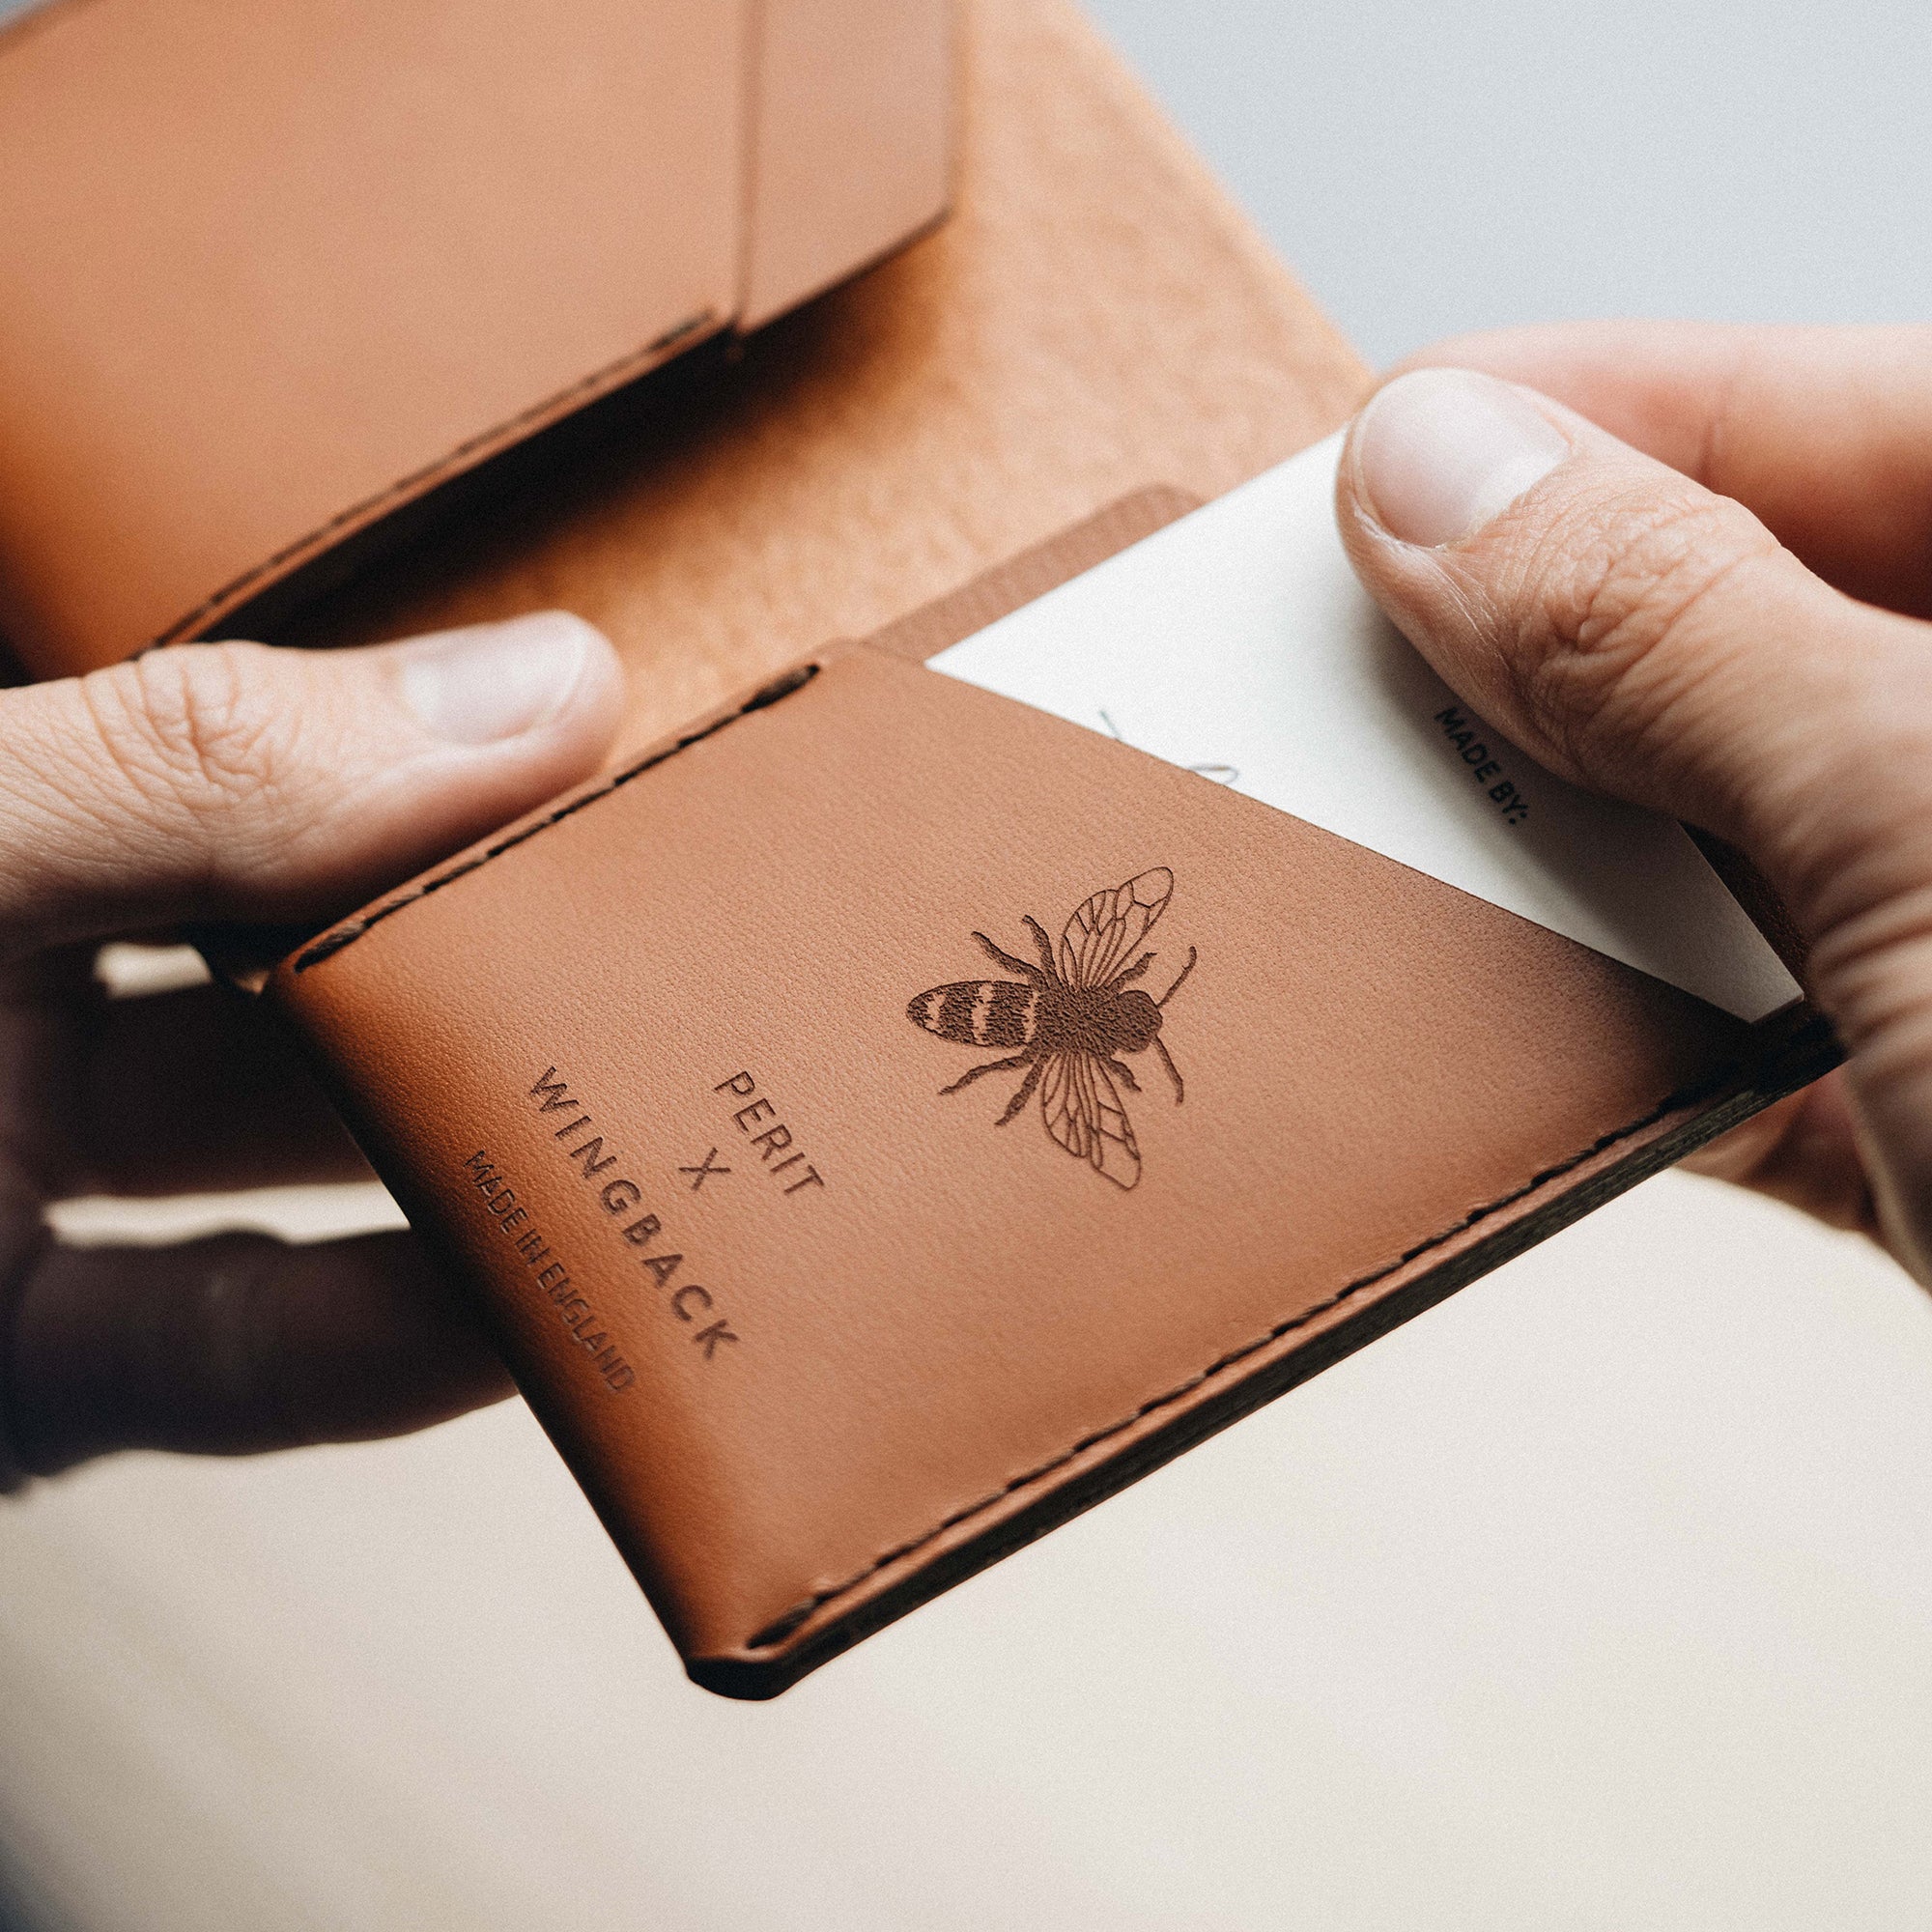 Wingback X Jan Perit - Winston Wallet Artist Collaboration featuring a bee engraving